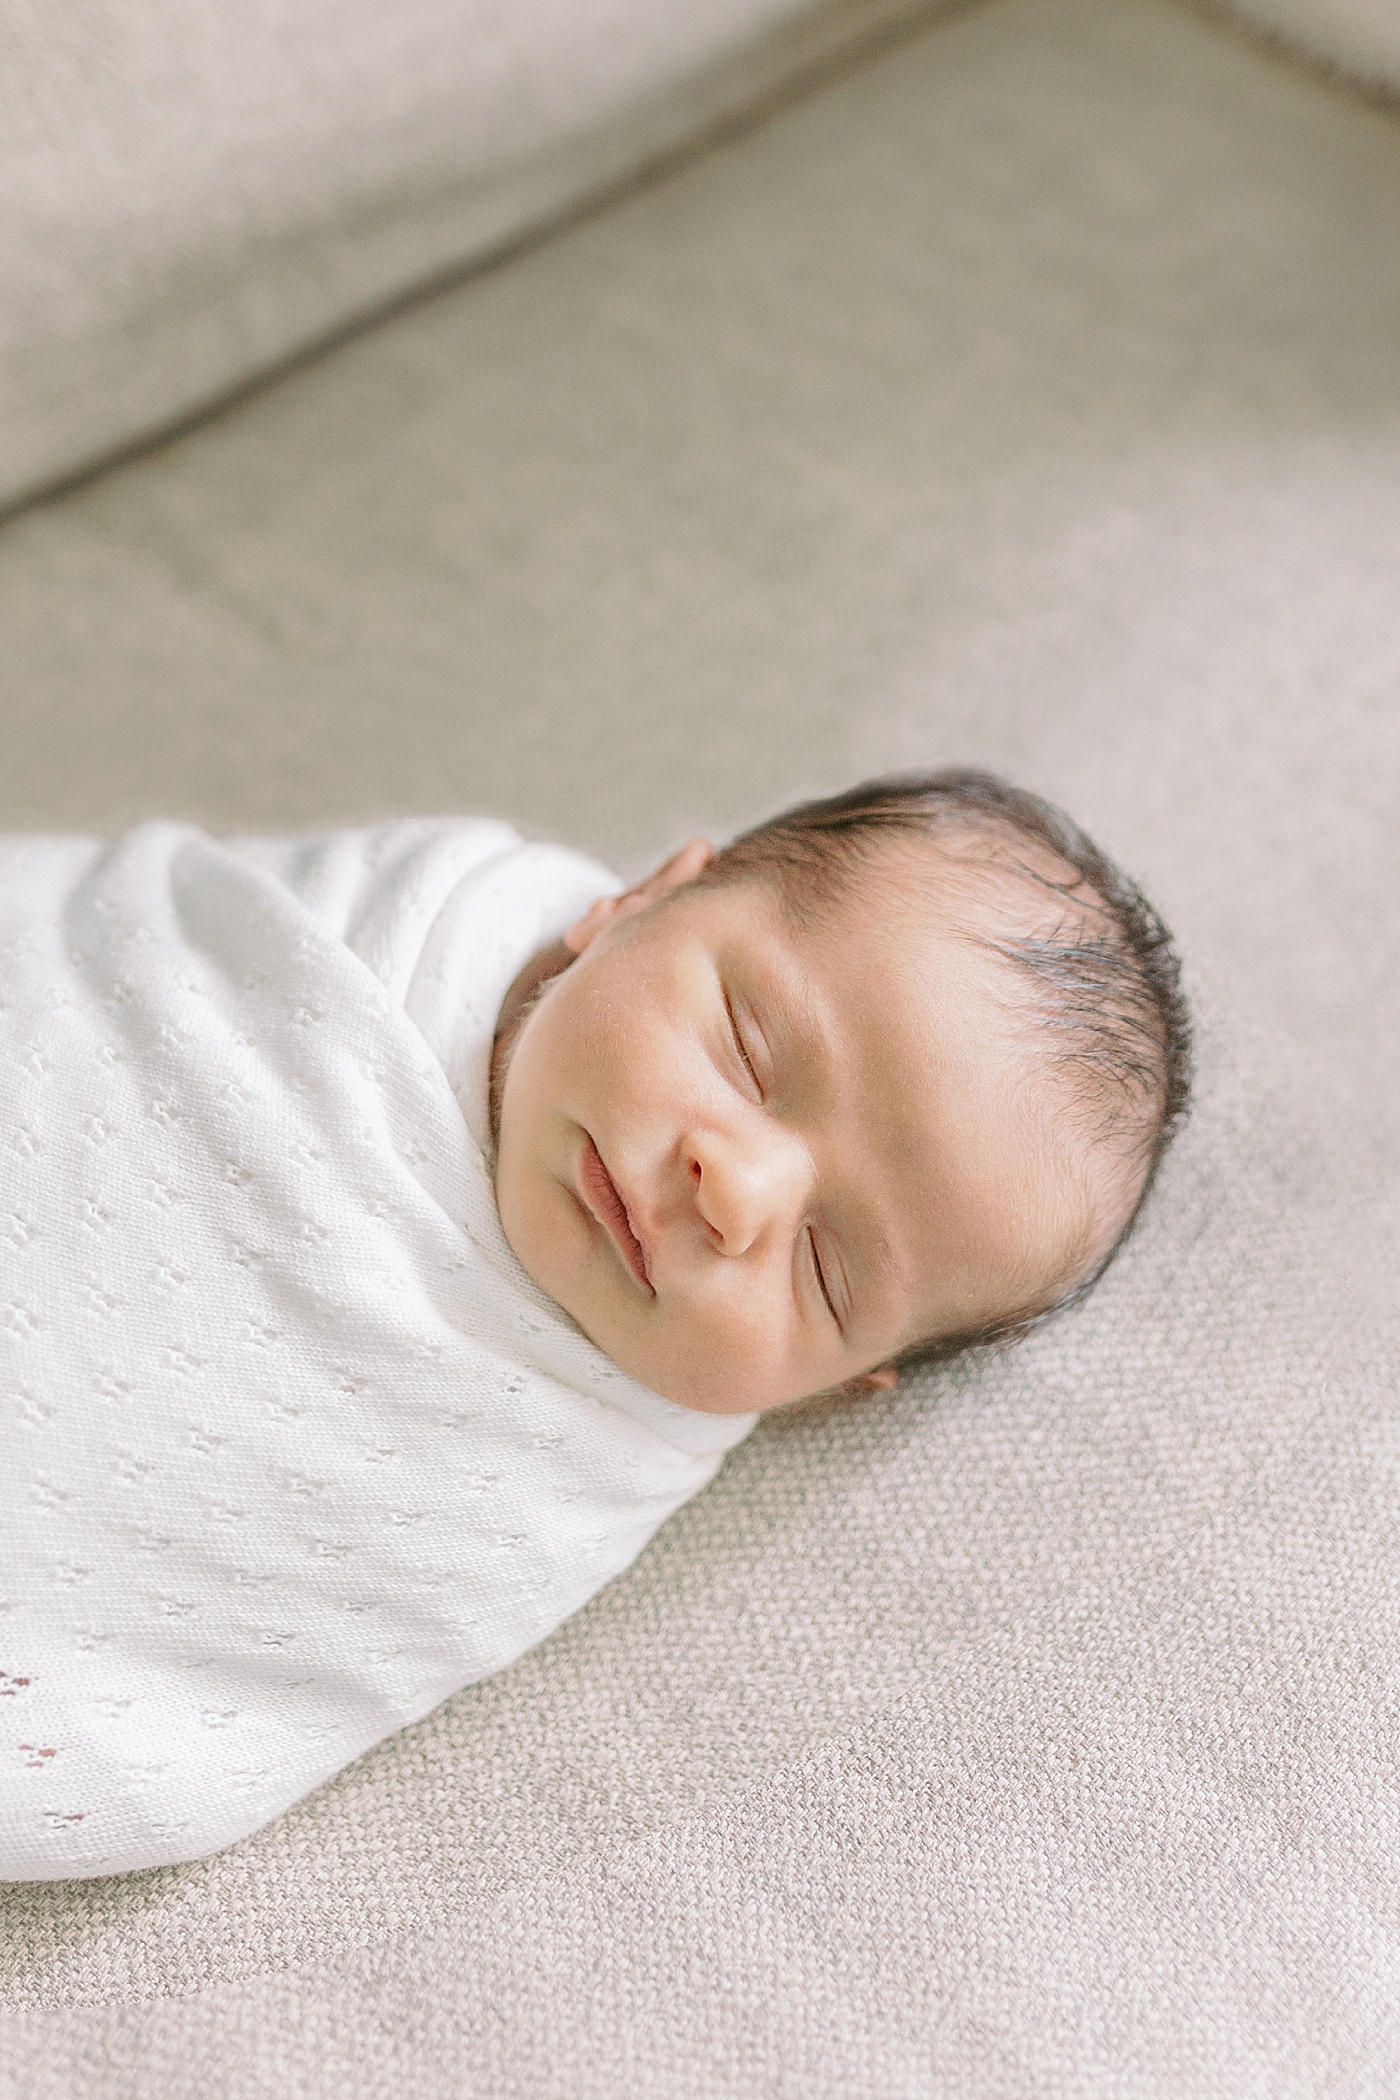 Newborn baby sleeping on a couch | Photo by Caitlyn Motycka Photography